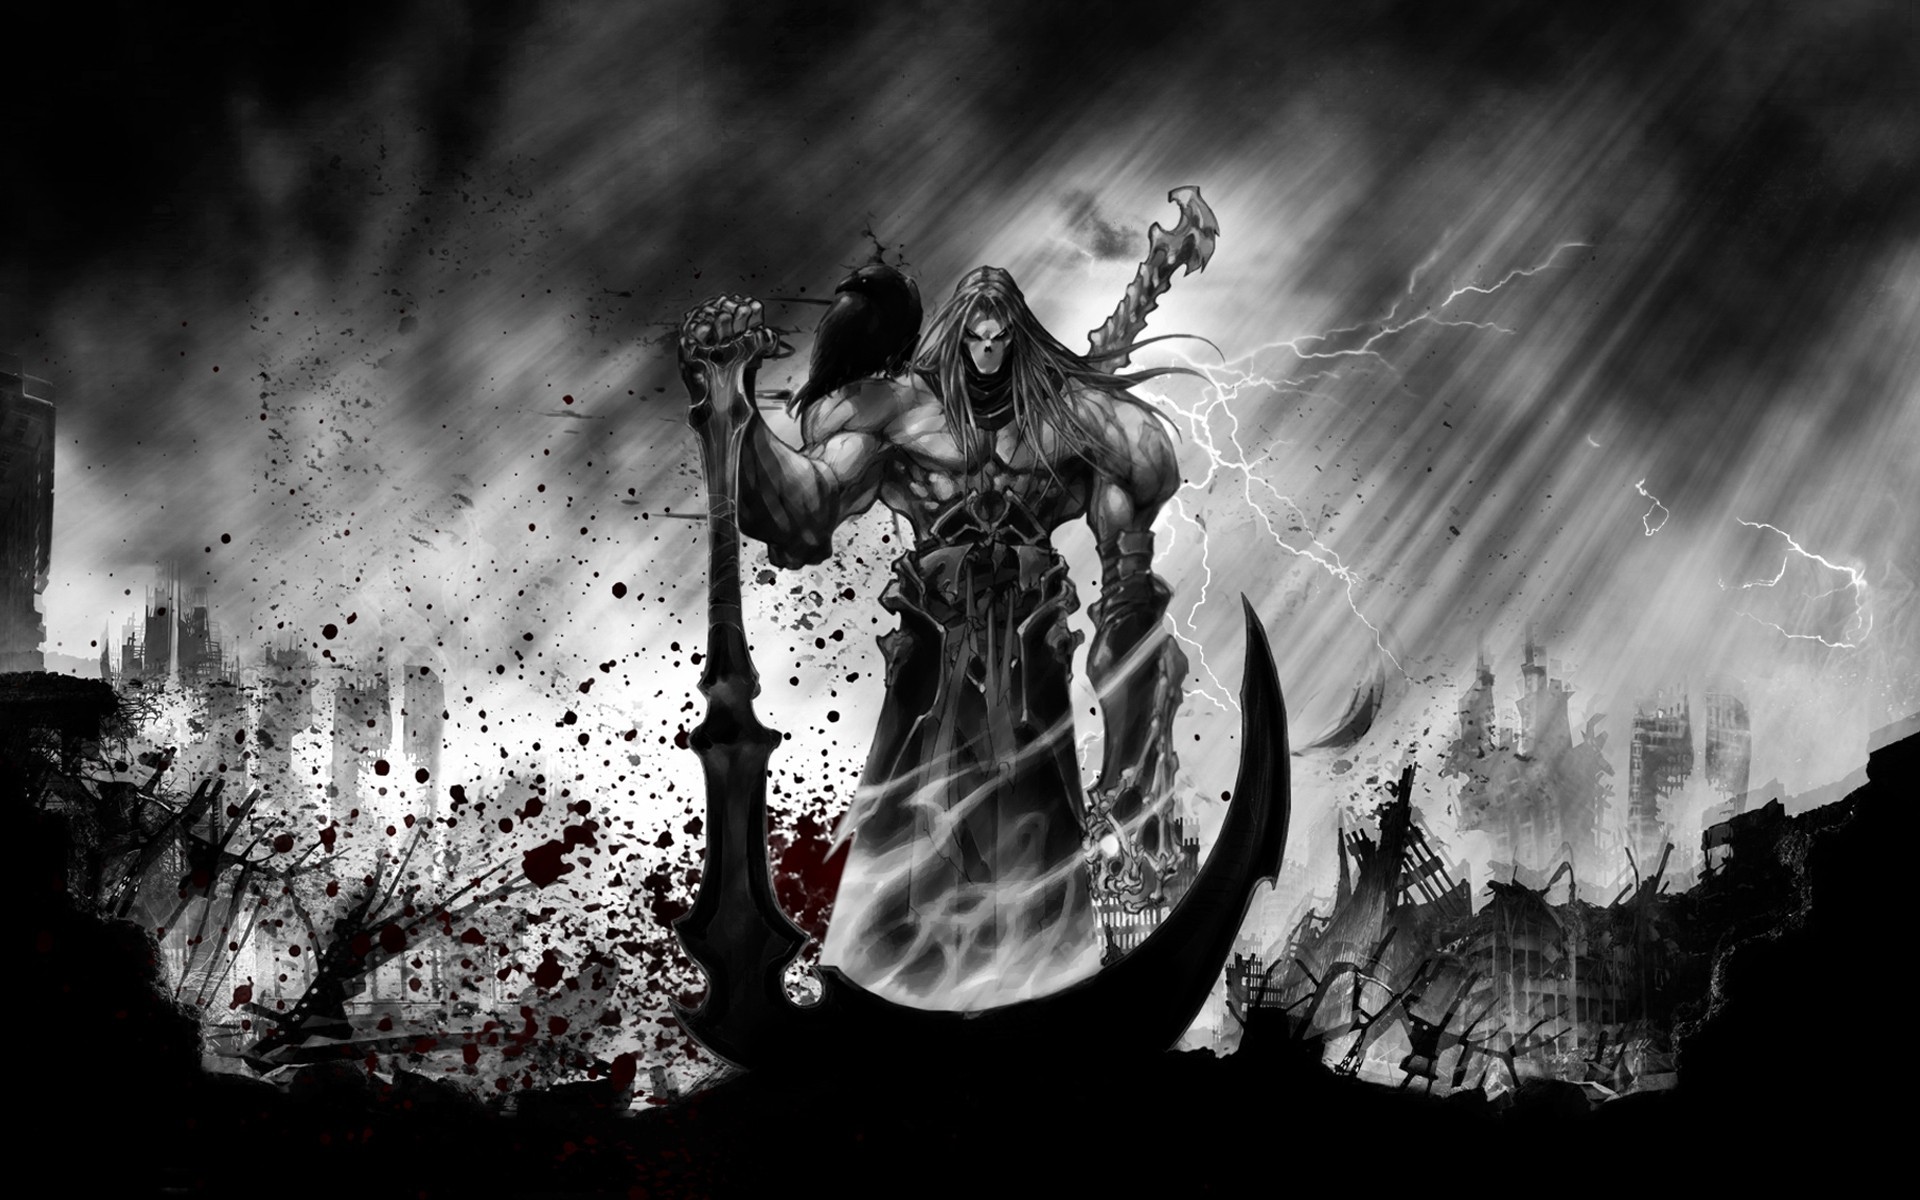 General 1920x1200 dark siders Four Horsemen of the Apocalypse death video games selective coloring Darksiders video game art